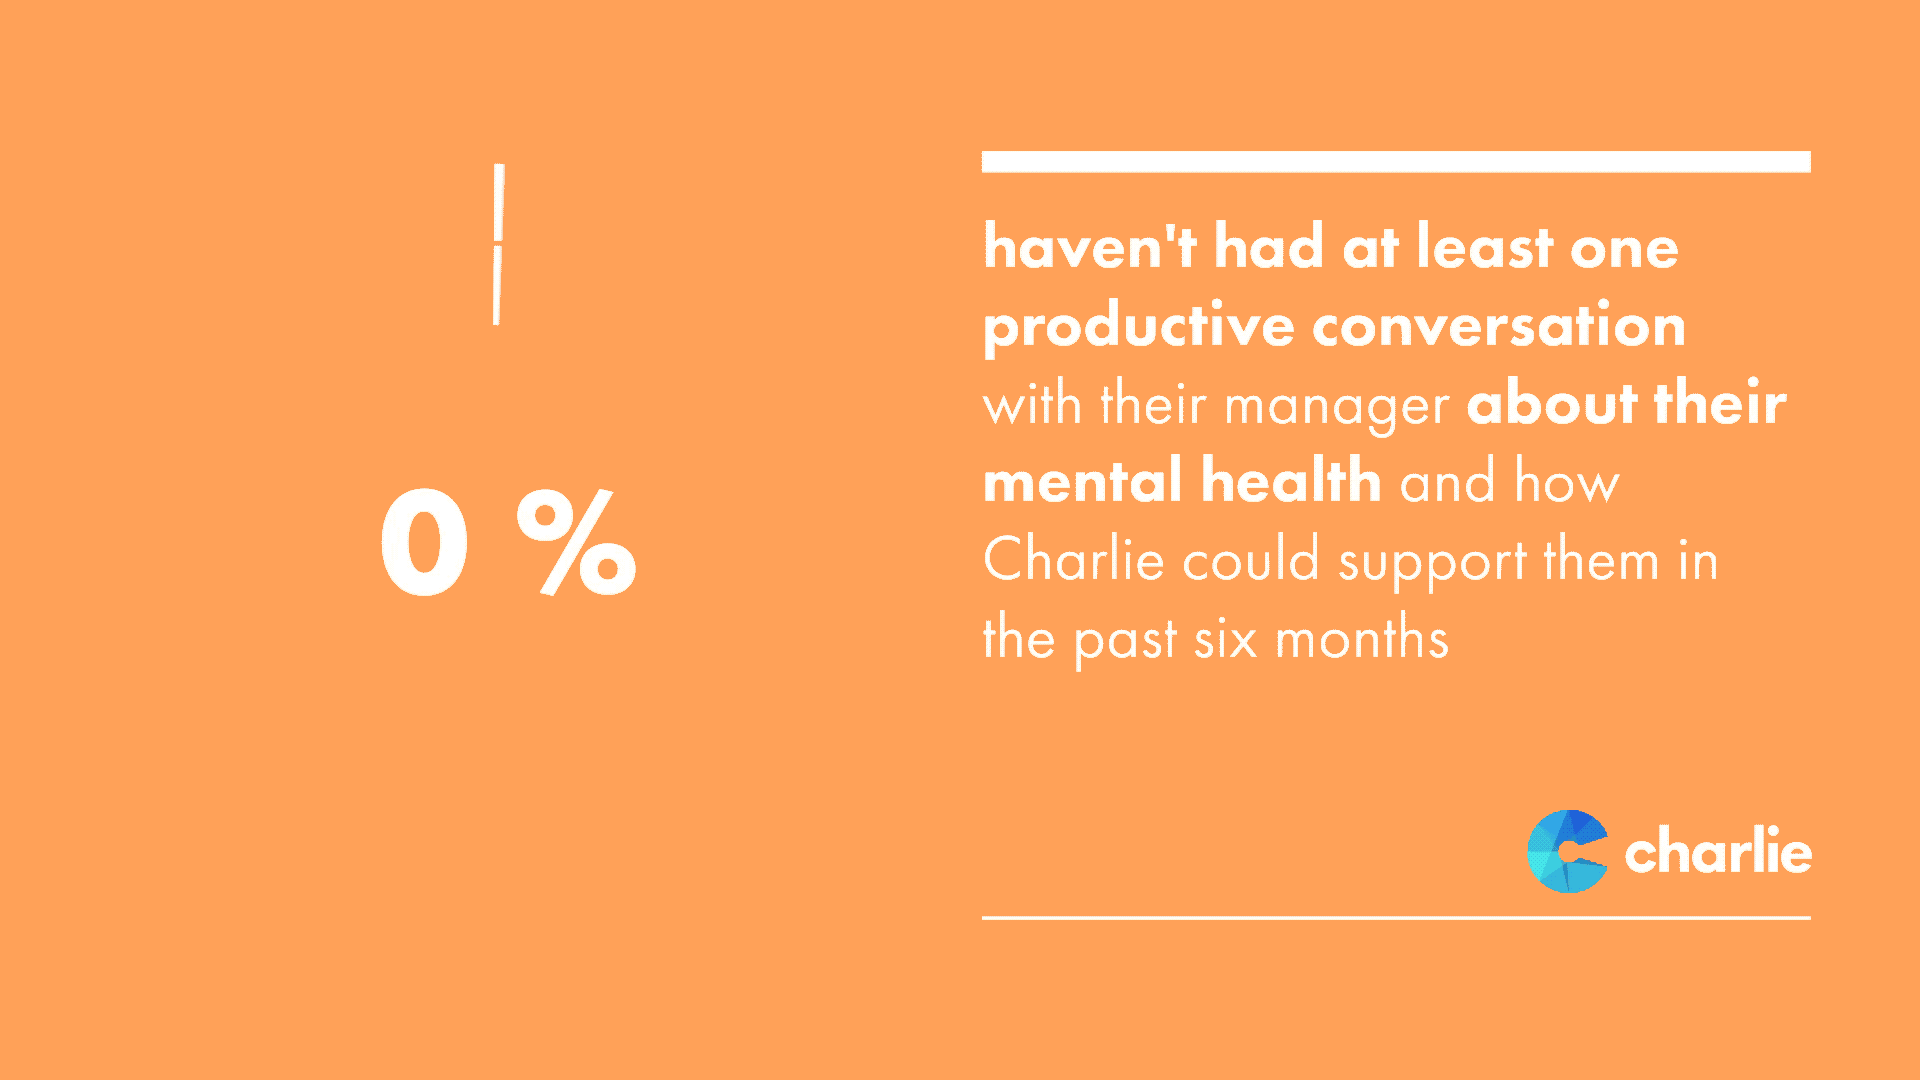 28% of our employees haven't had at least one productive conversation with their manager about their mental health and how to get the right support in the past 6 months